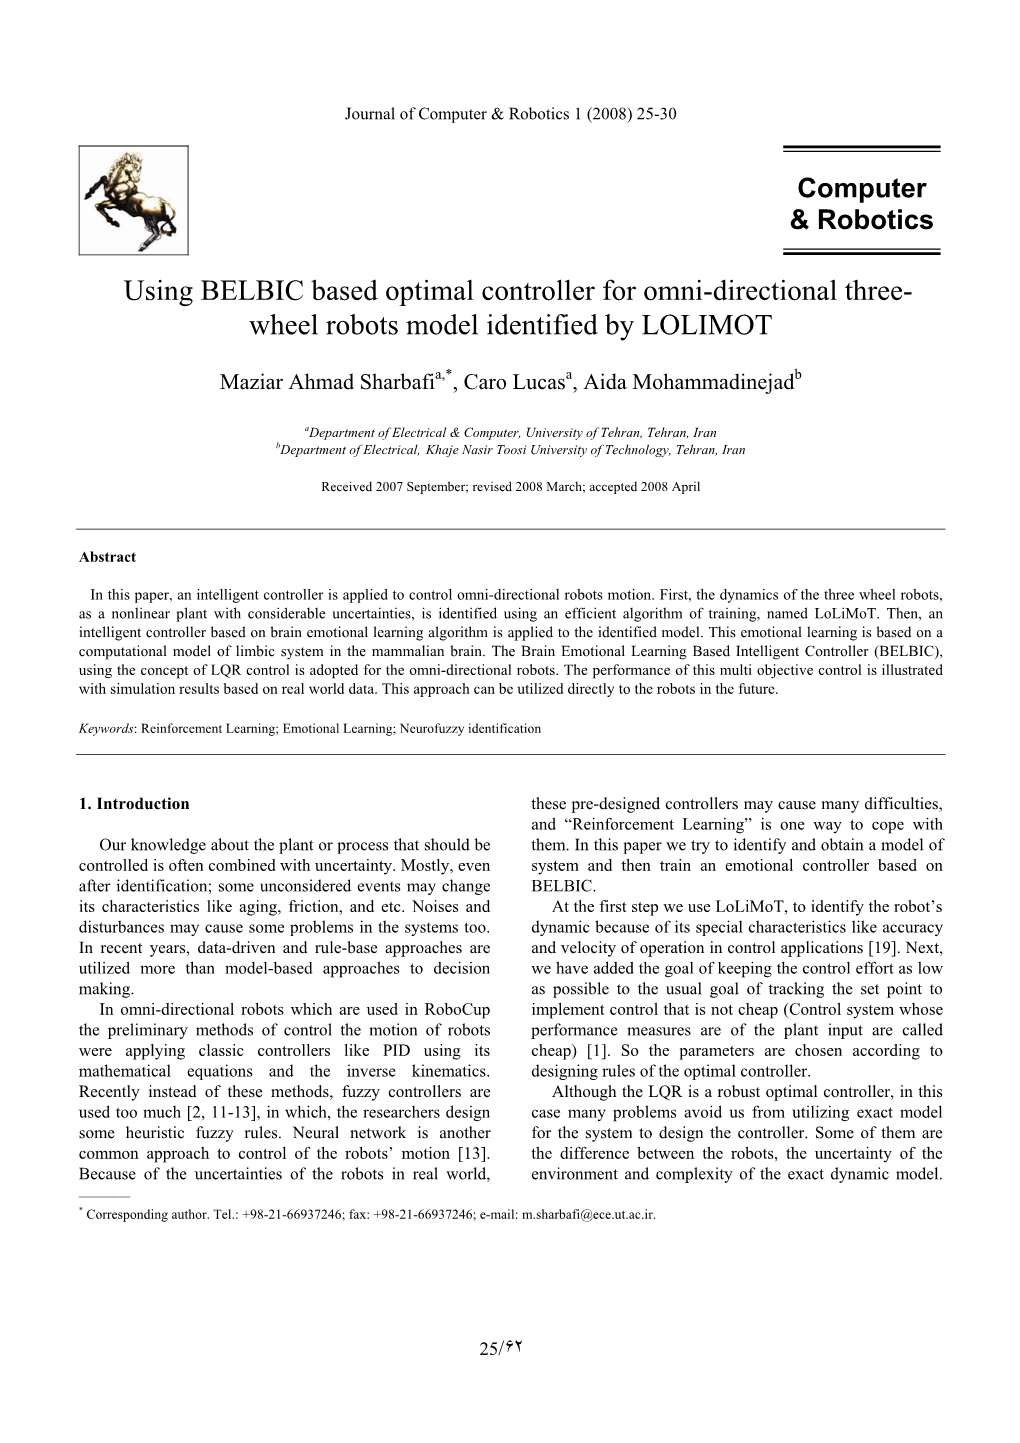 Using BELBIC Based Optimal Controller for Omni-Directional Three- Wheel Robots Model Identified by LOLIMOT